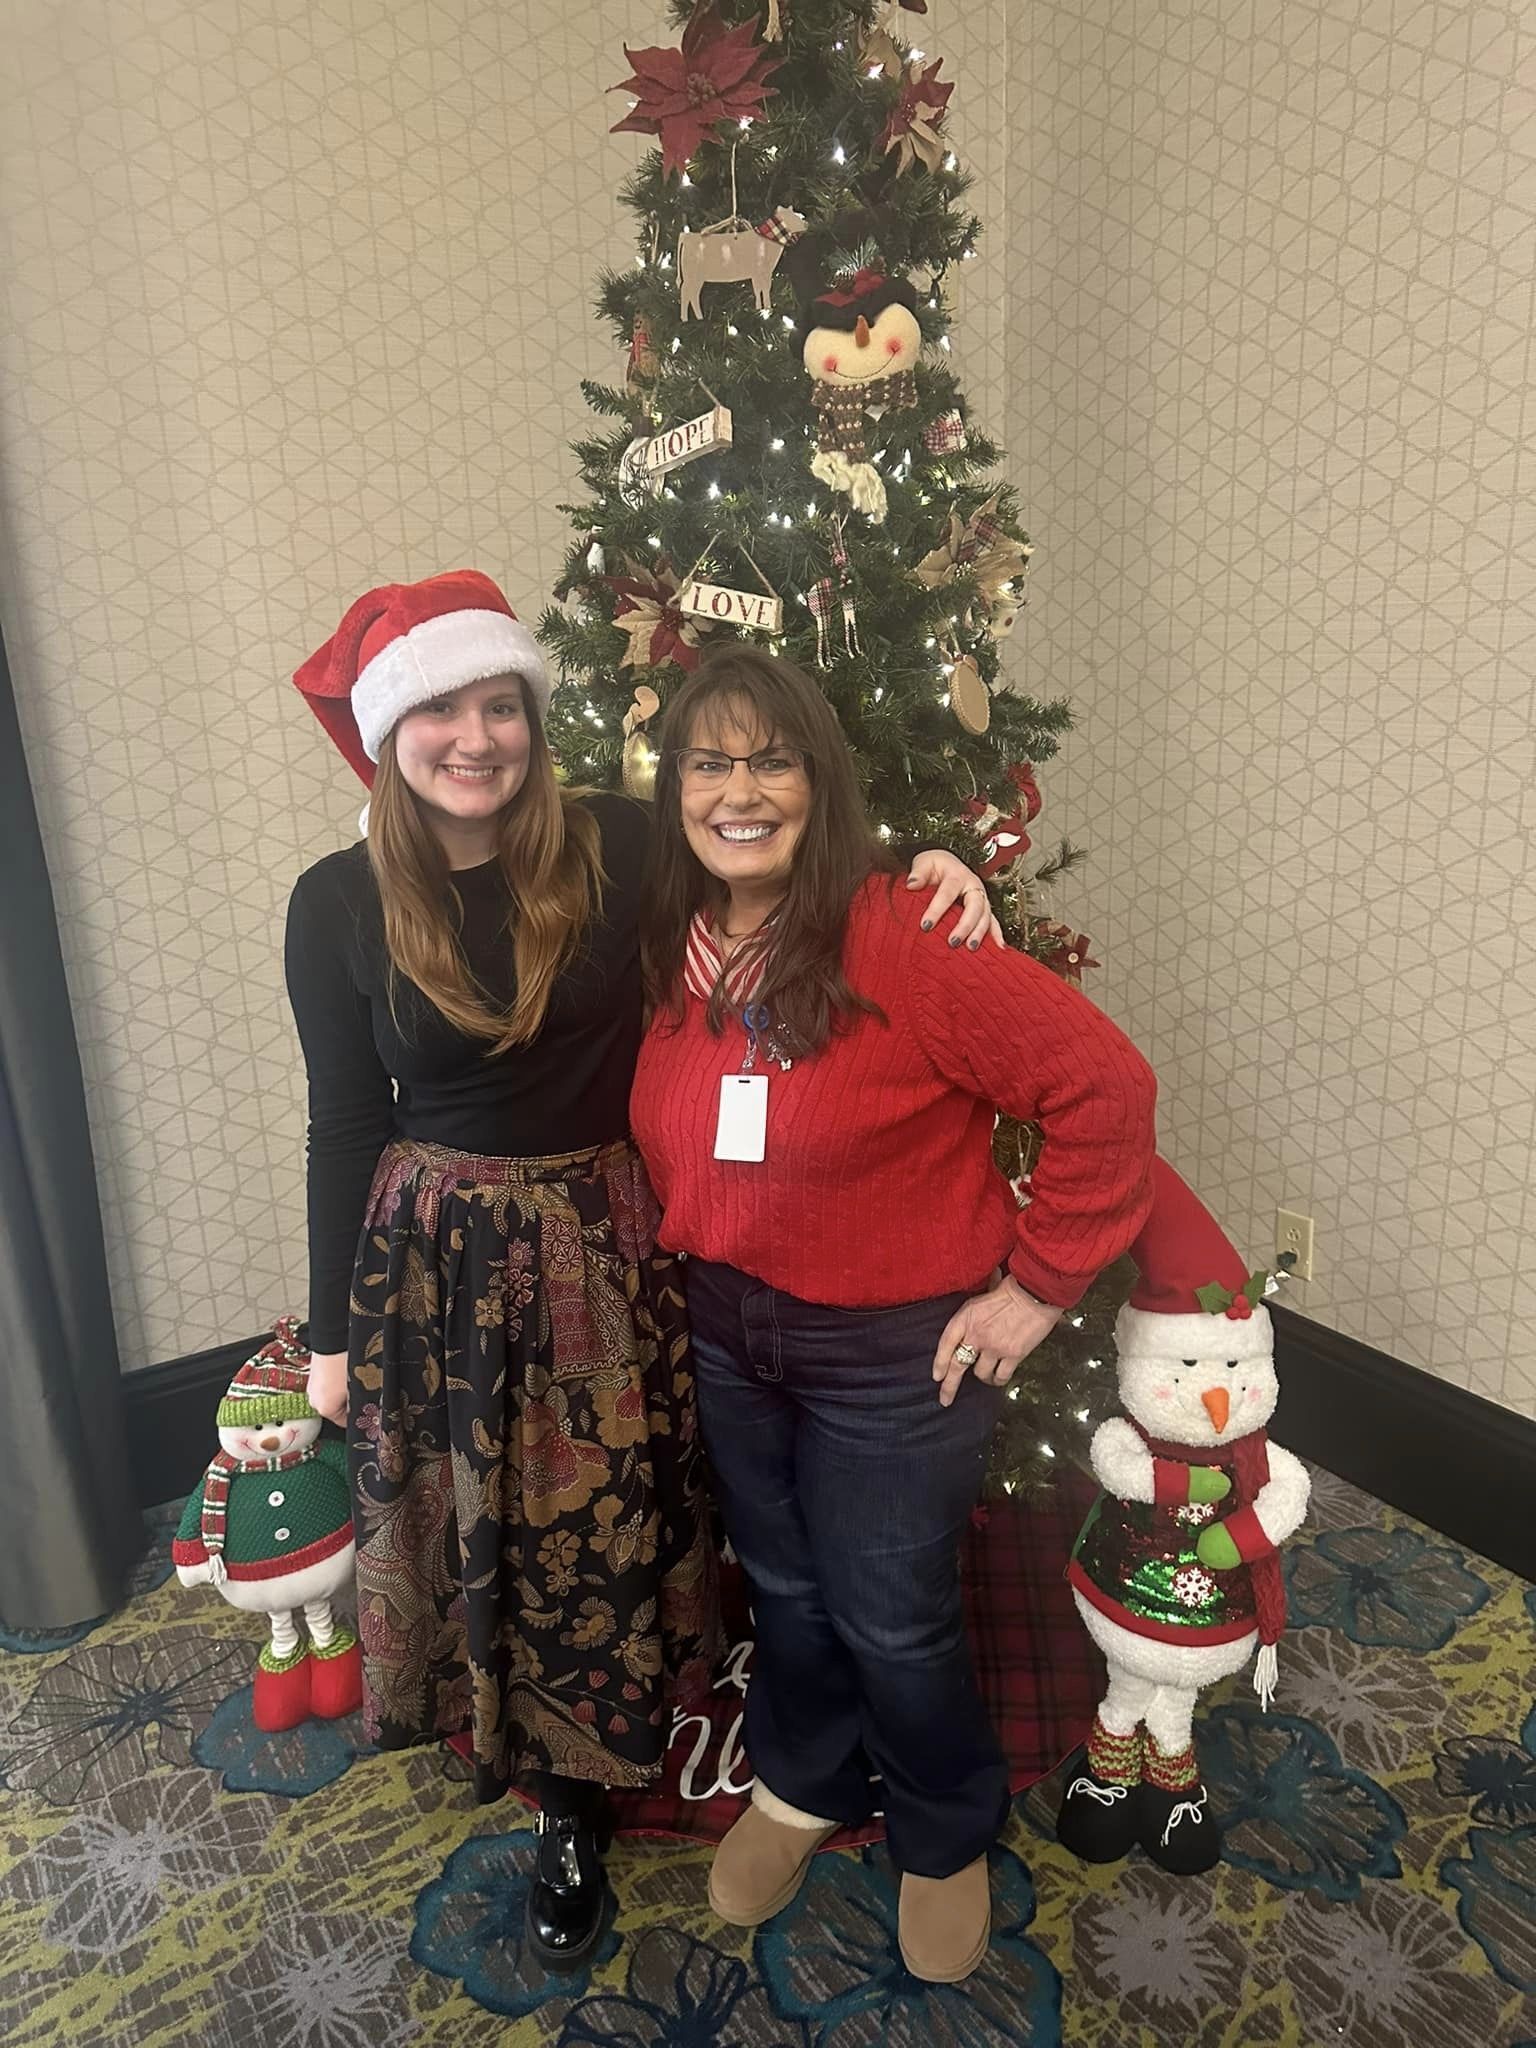 Arkansas Cancer Coalition Quarterly Meeting- Christmas Celebration with BreastCare staff